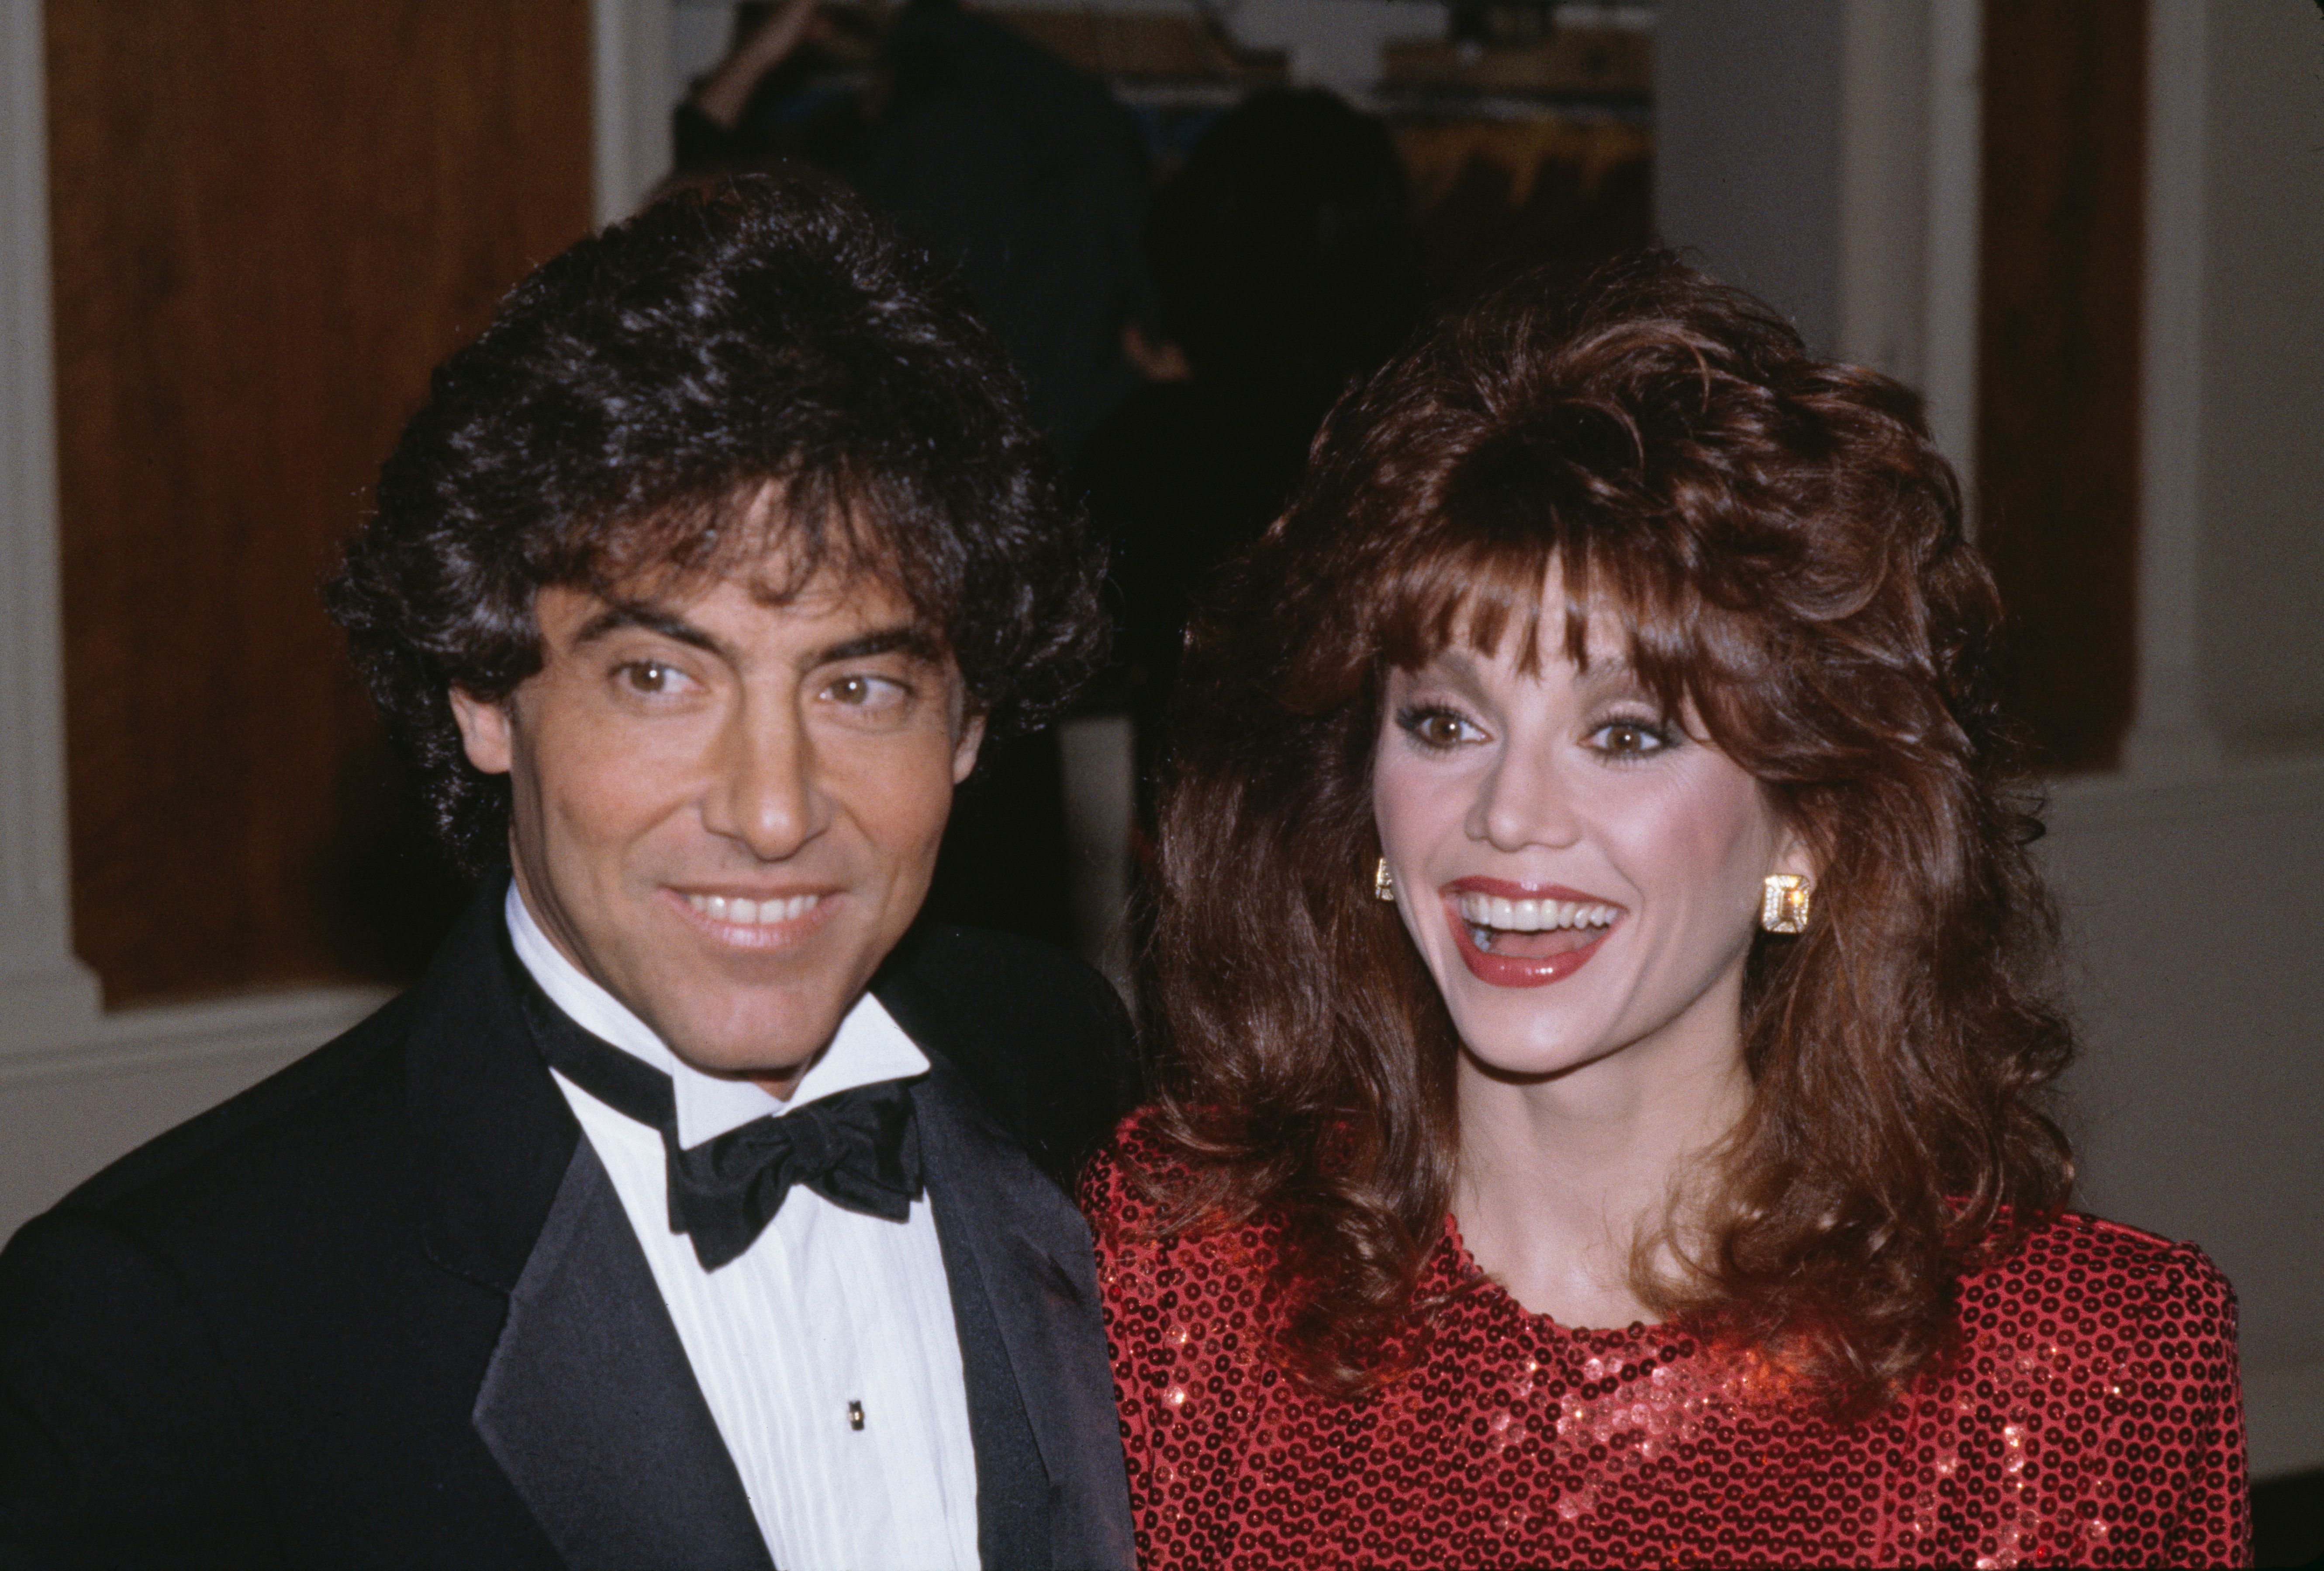 American plastic surgeon Dr Harry Glassman and his wife, American actress Victoria Principal attend the 40th Annual Golden Globe Awards, held at the Beverly Hilton Hotel in Beverly Hills, California, 1983. | Source: Getty Images